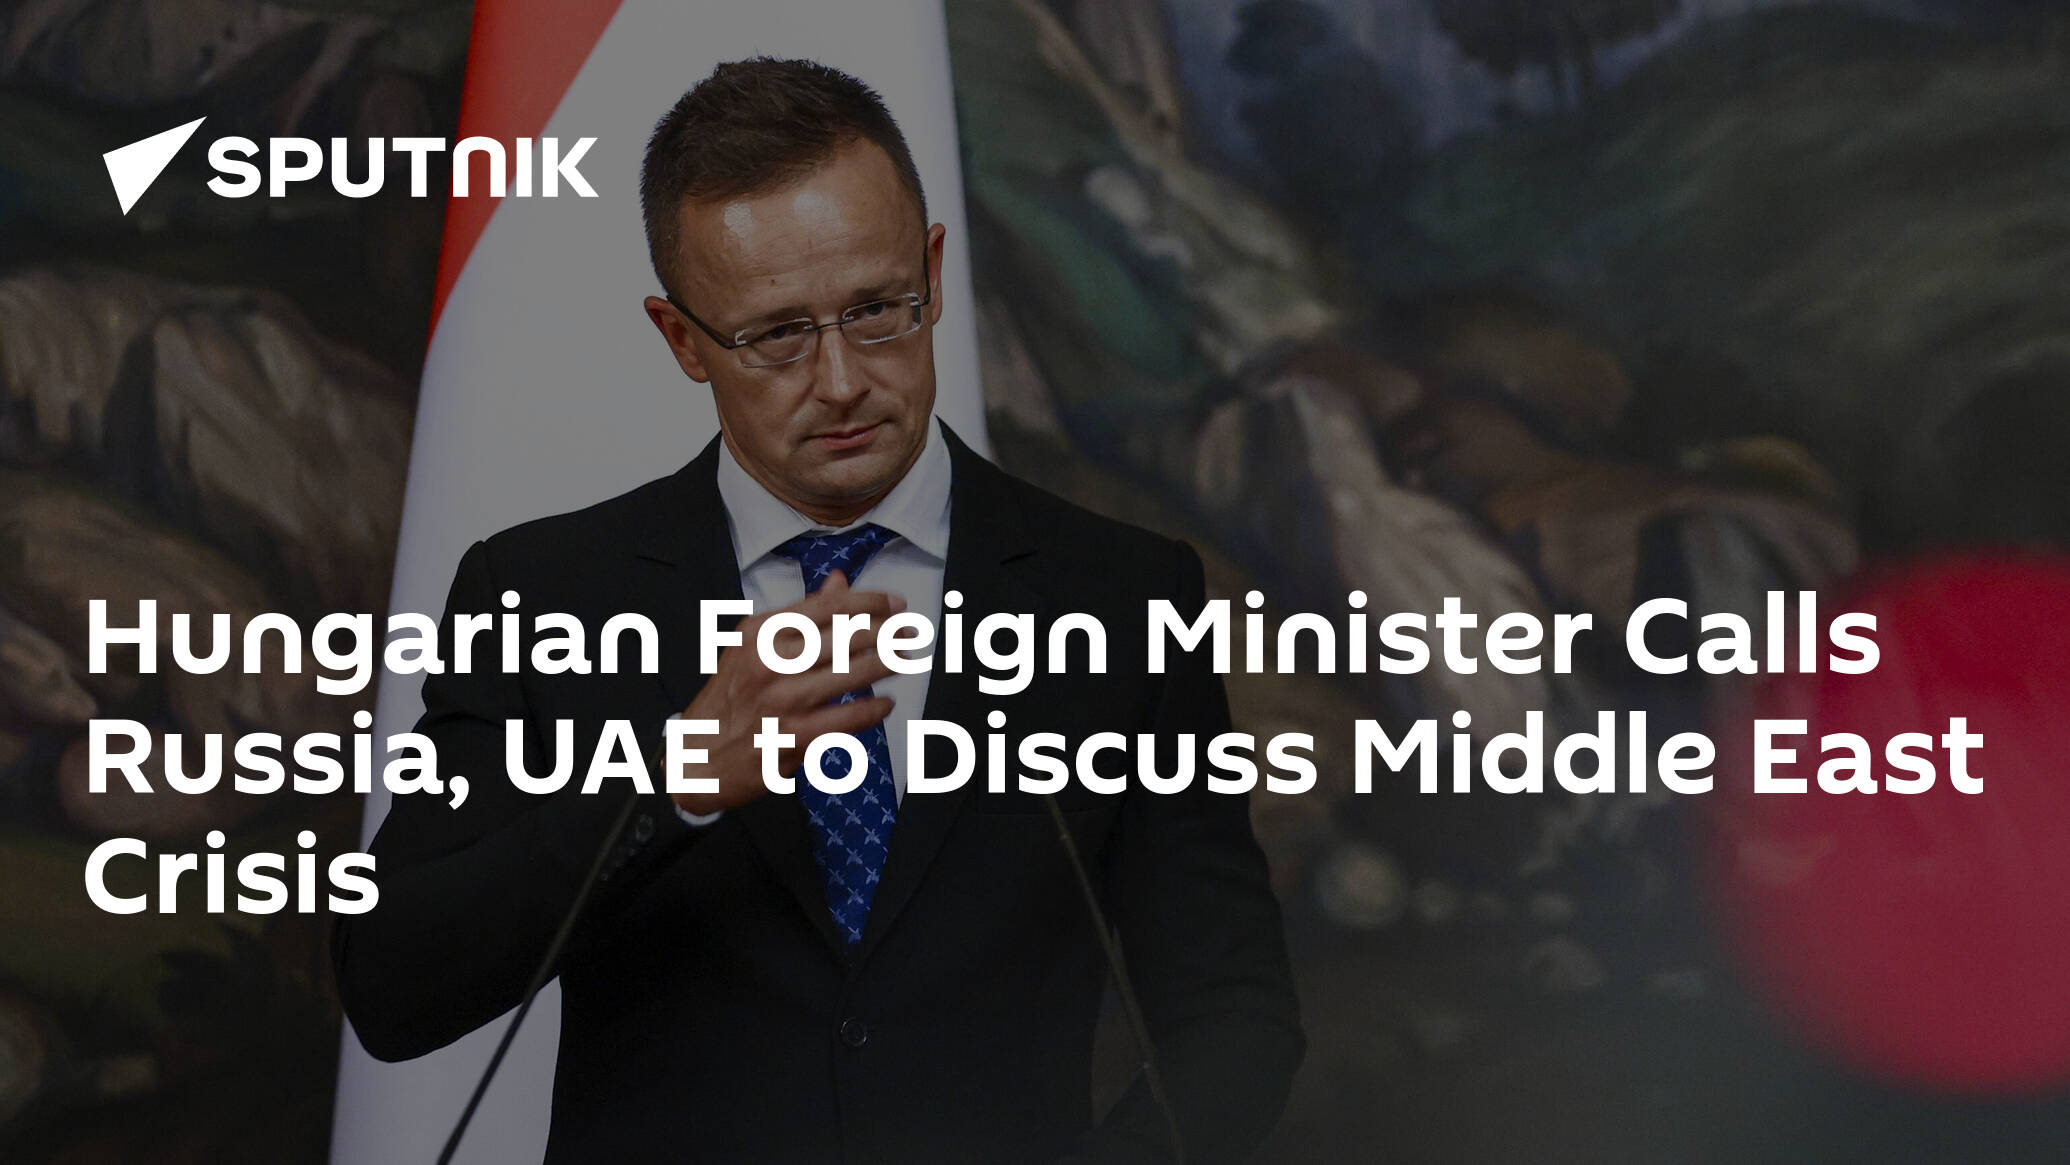 Hungarian Foreign Minister Calls Russia, UAE to Discuss Middle East Crisis